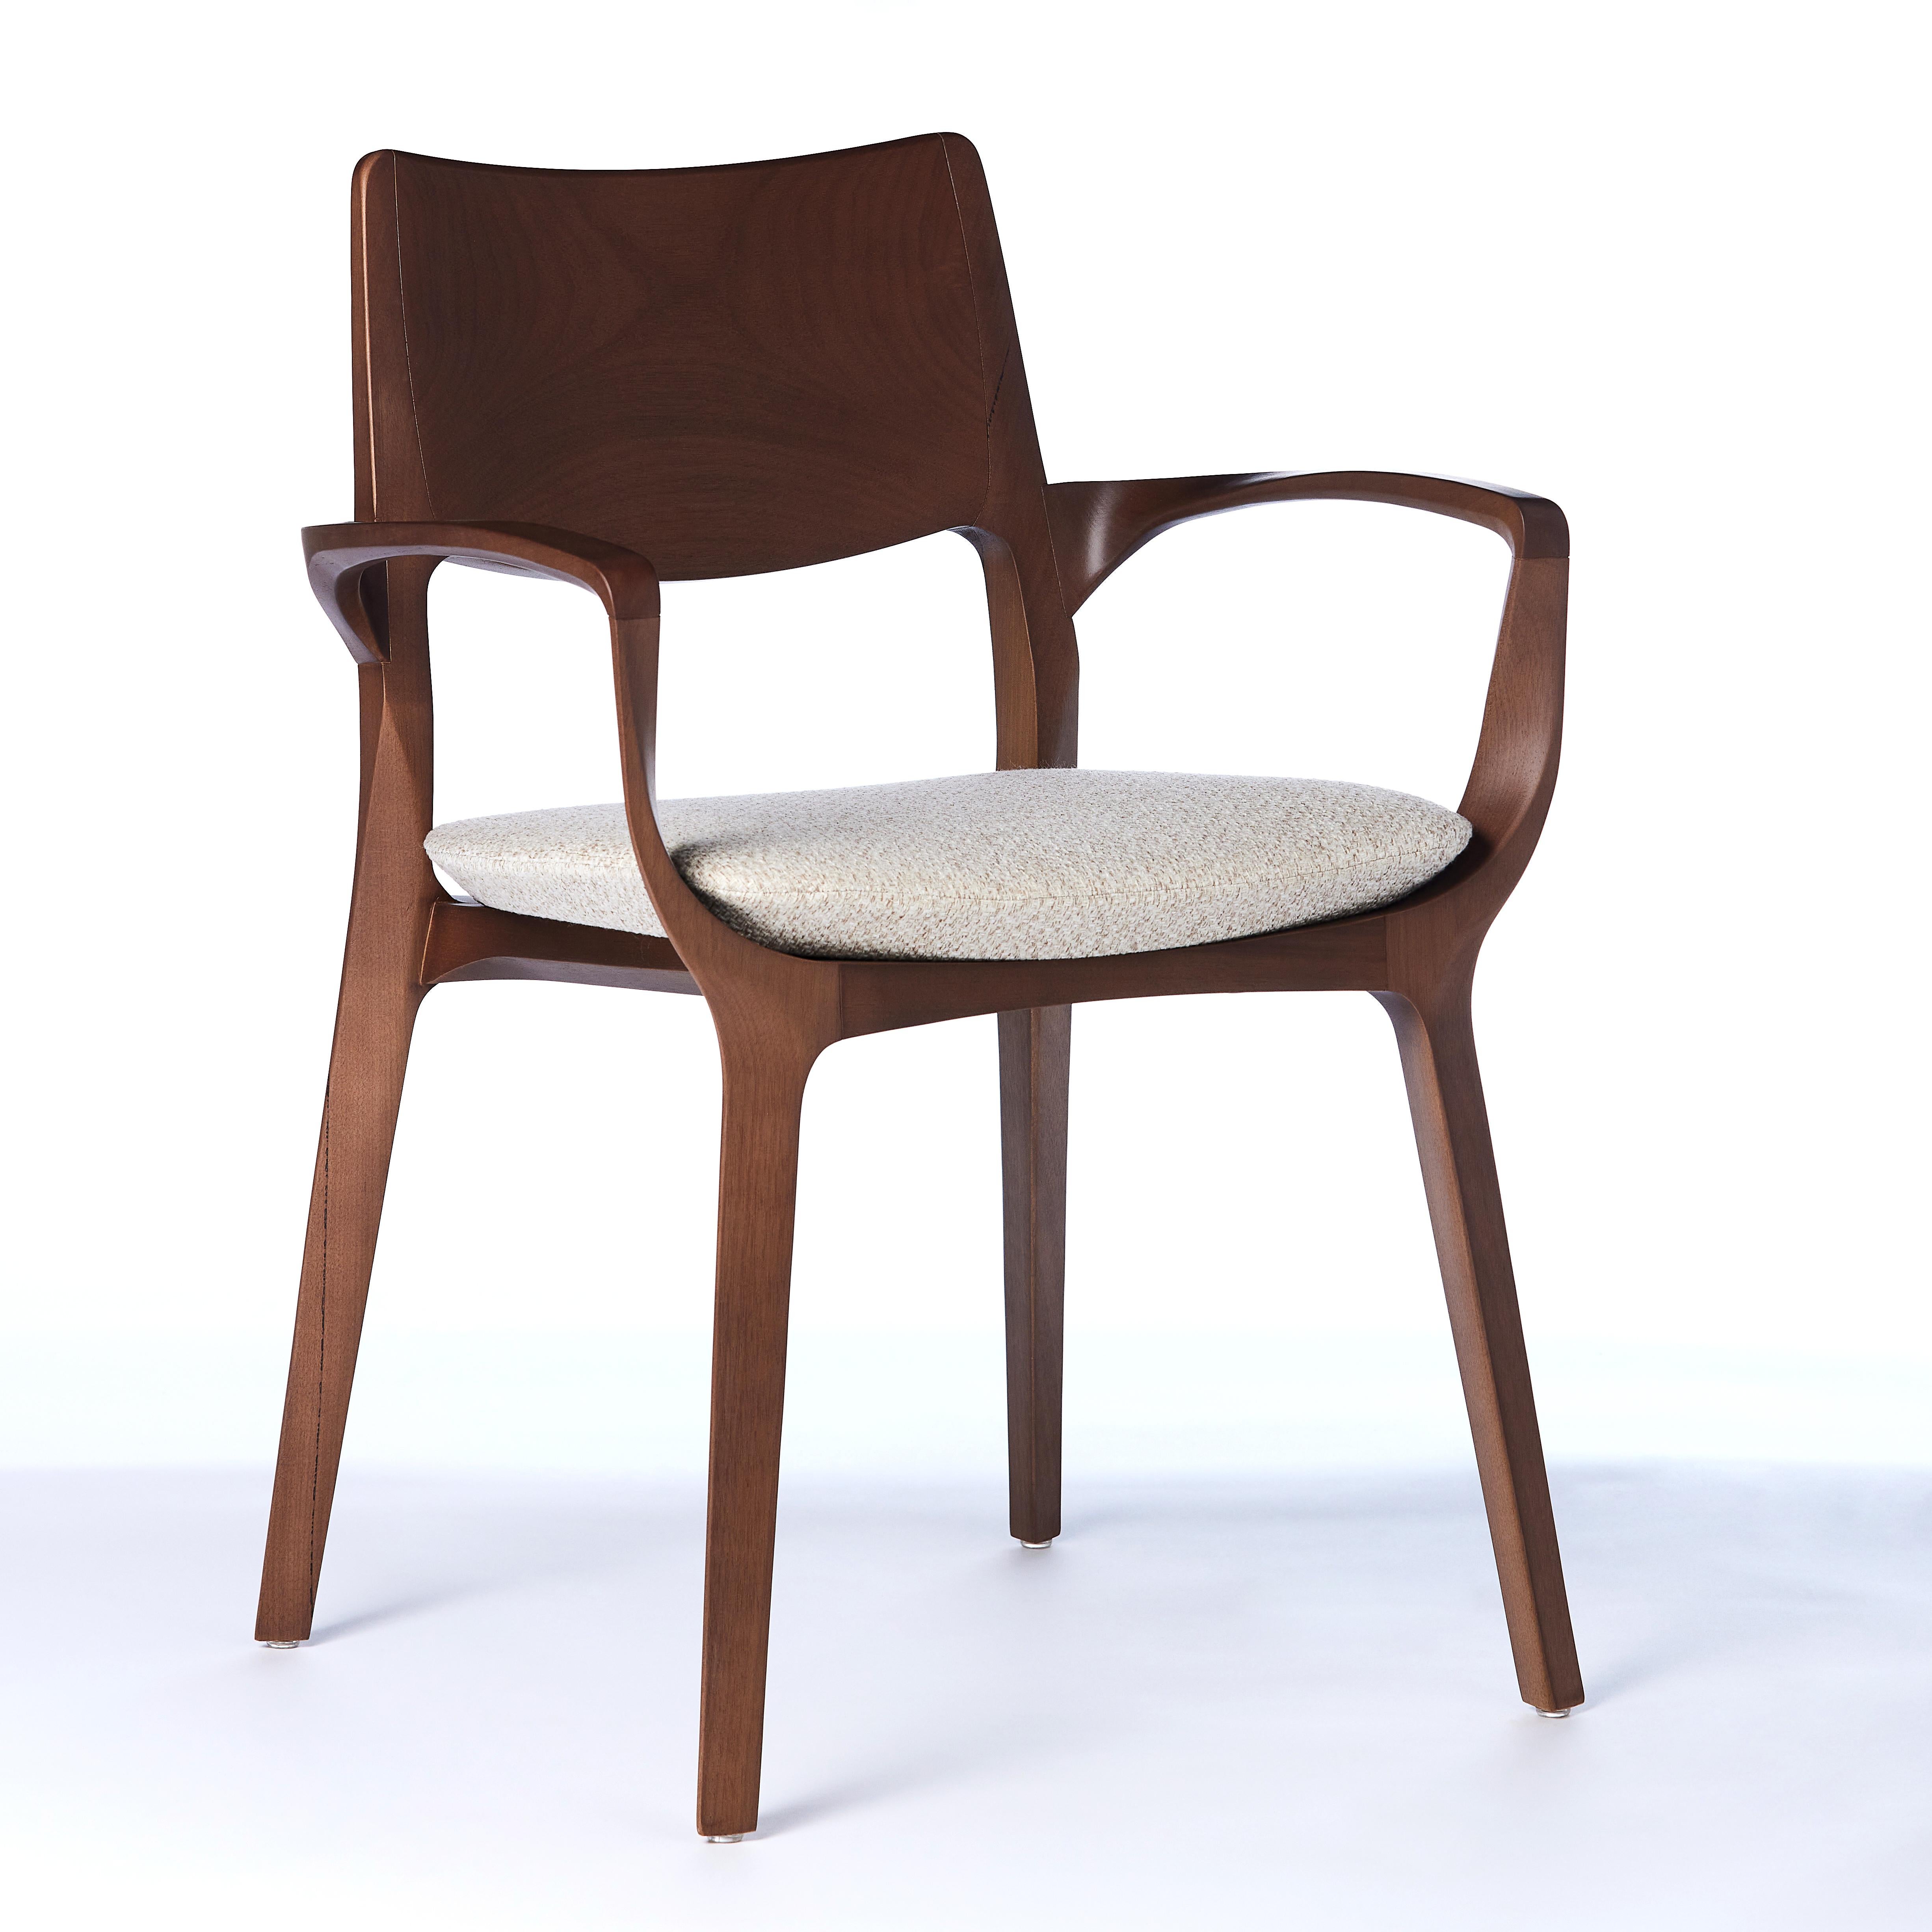 Modern Style Aurora Chair Sculpted in Walnut Finish No Arms, leather seating For Sale 1